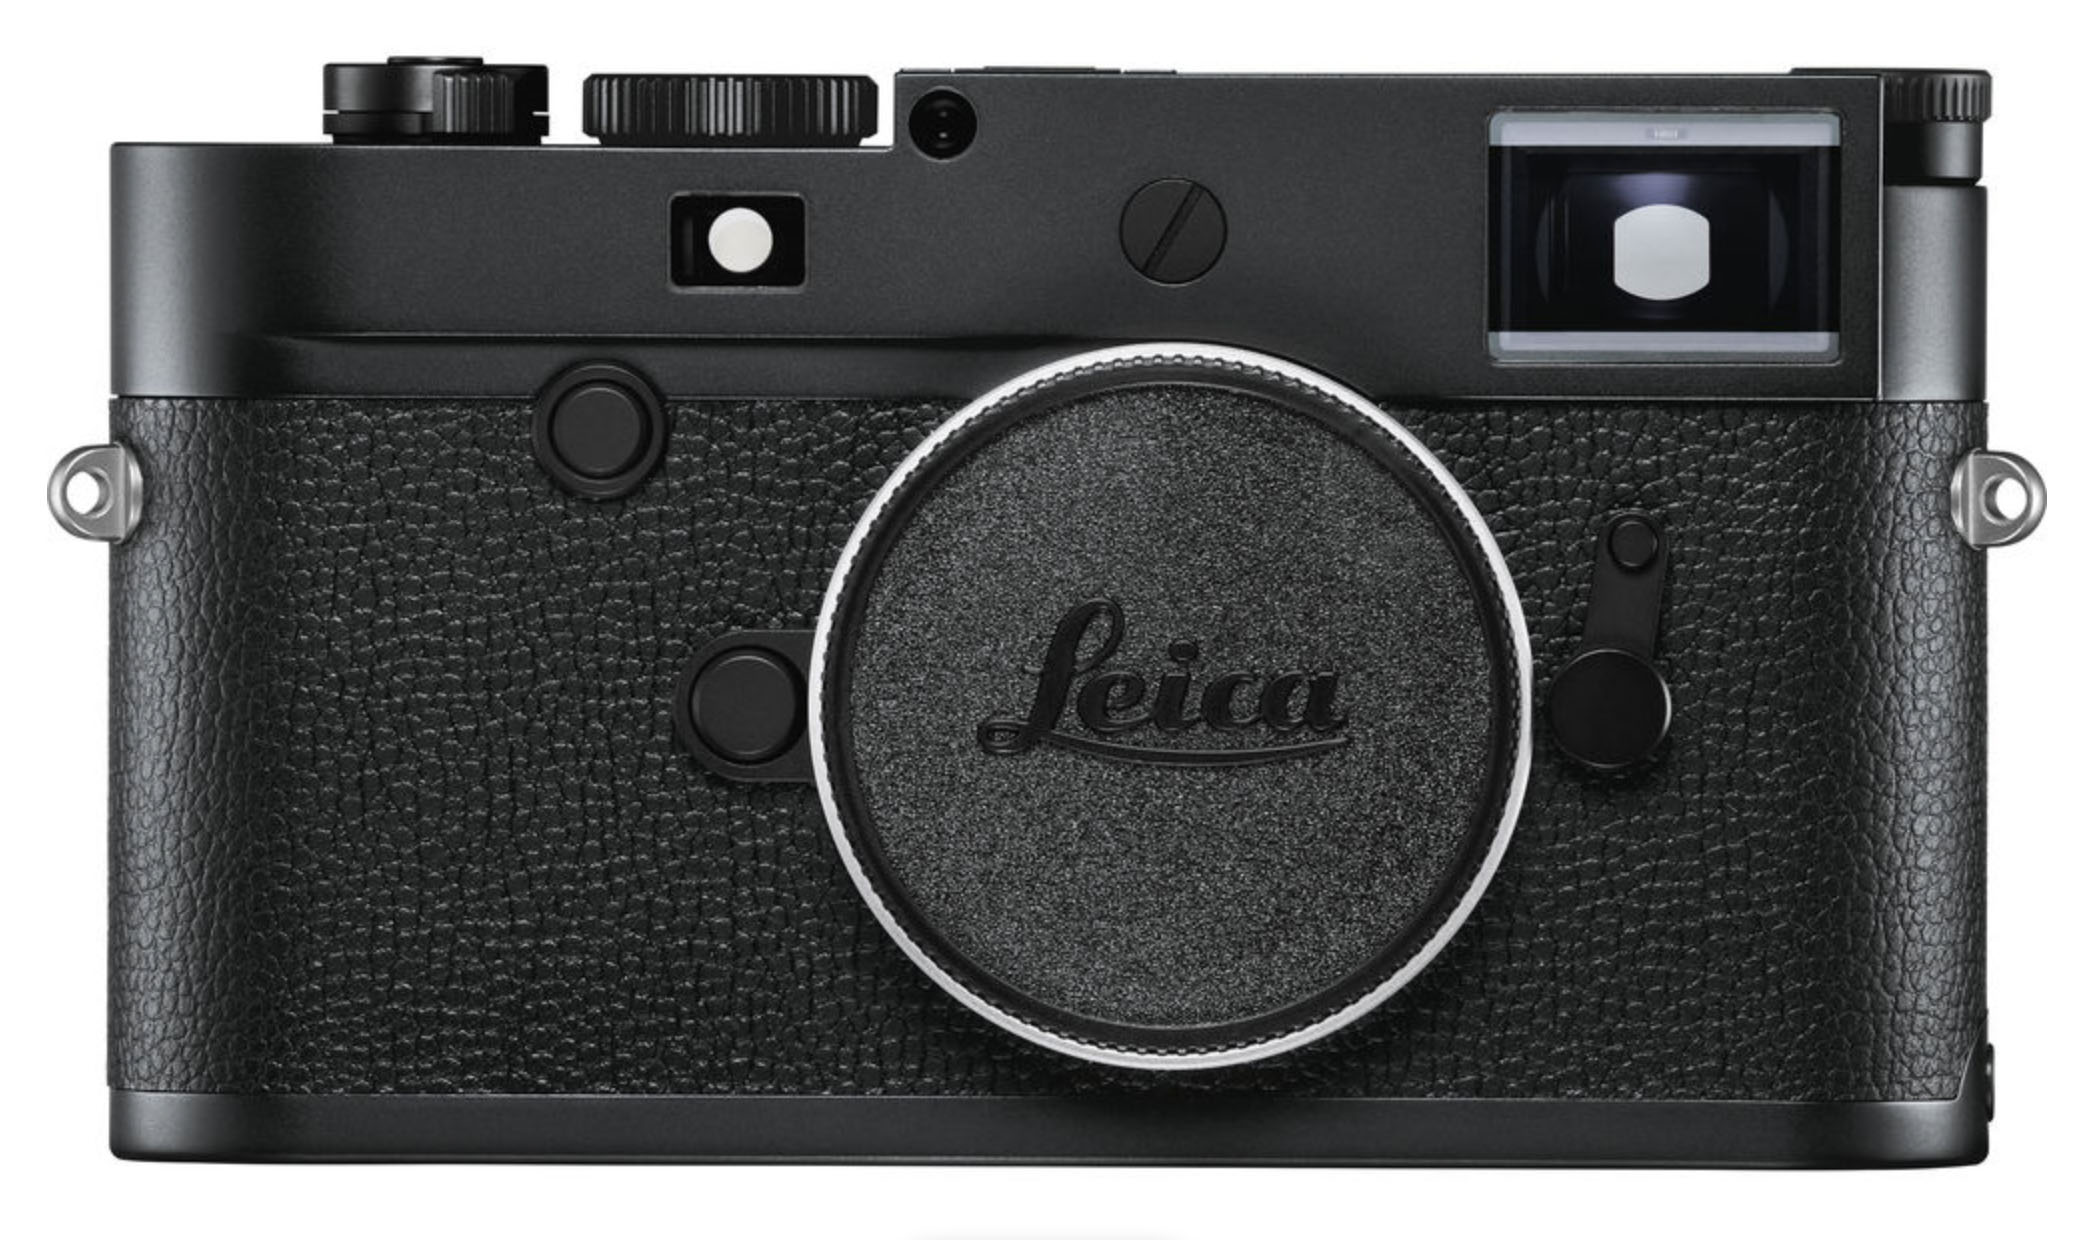 The Leica Monochrome M10. Is the latest version, the greatest 